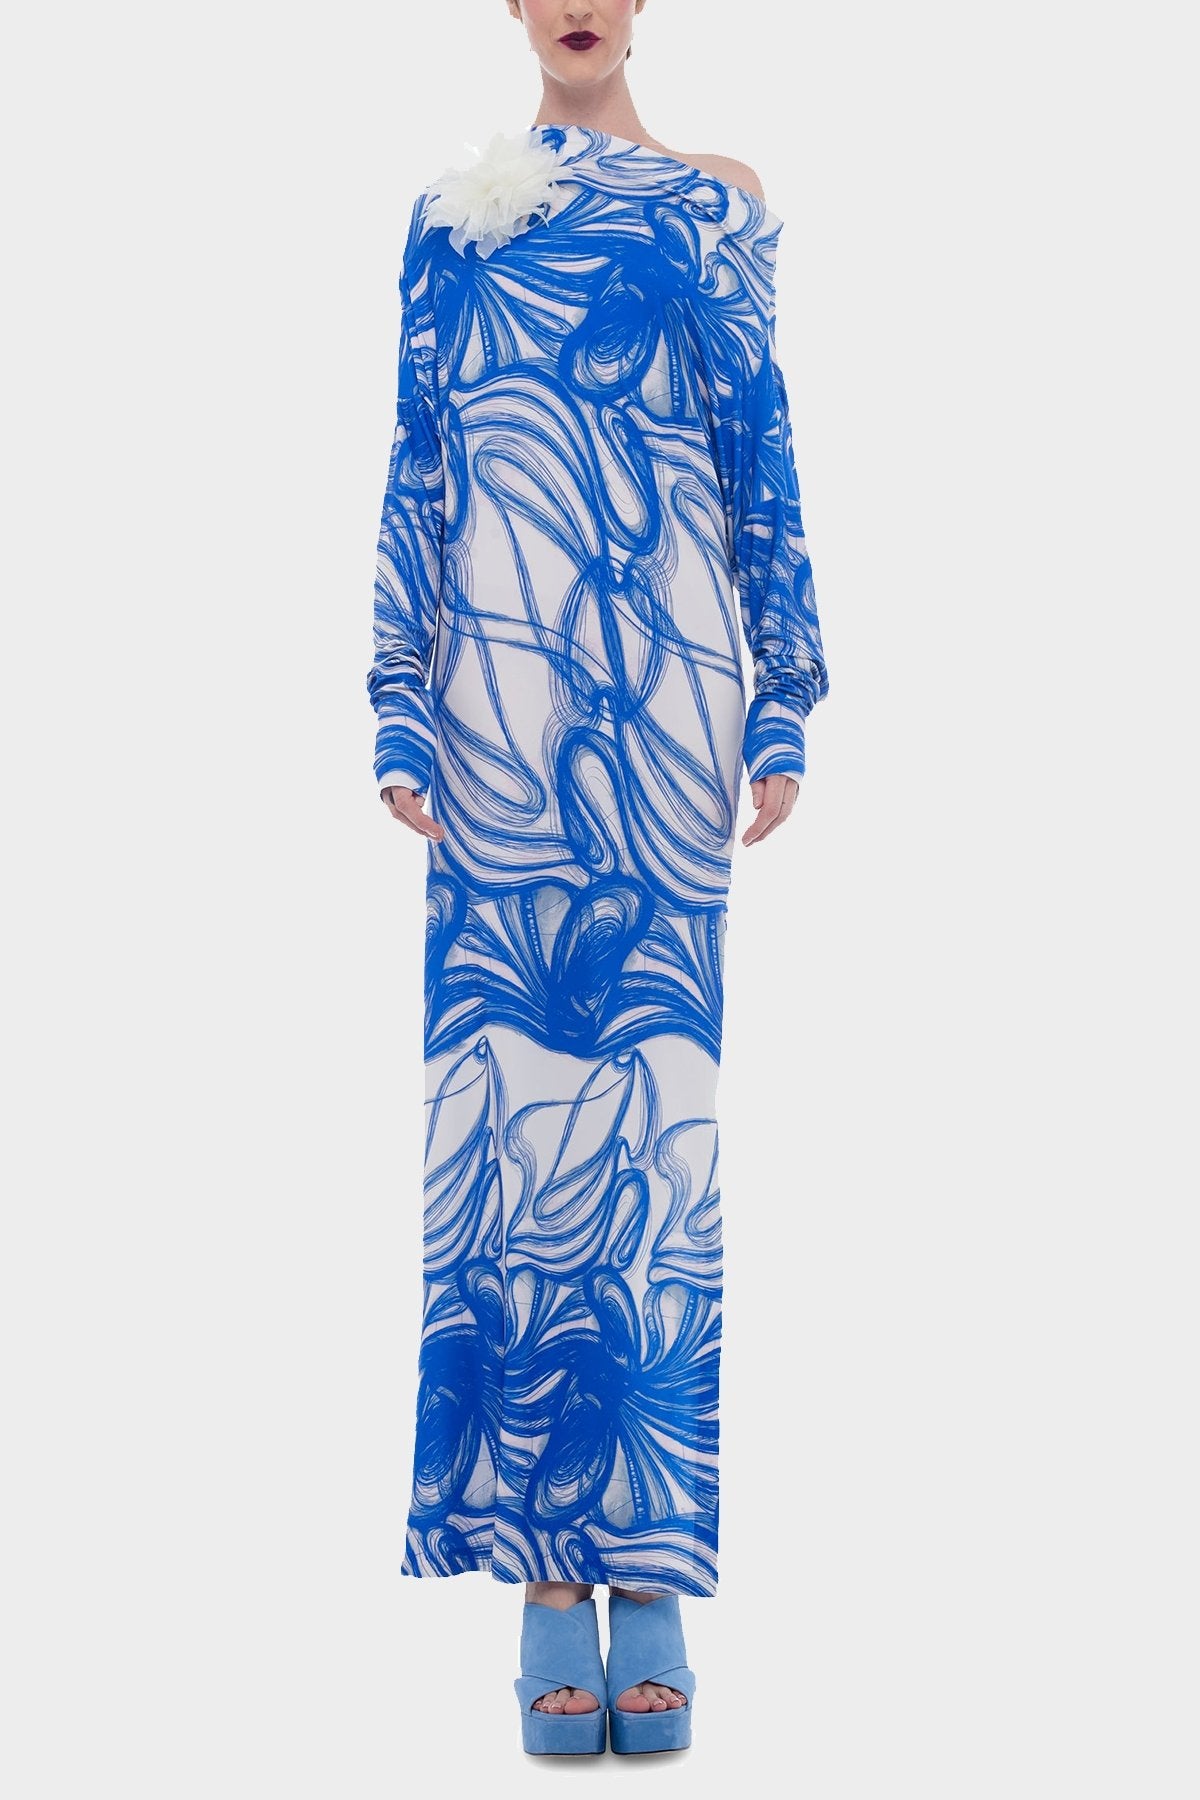 All in One Side Slit Gown in Blue Swirl - shop-olivia.com